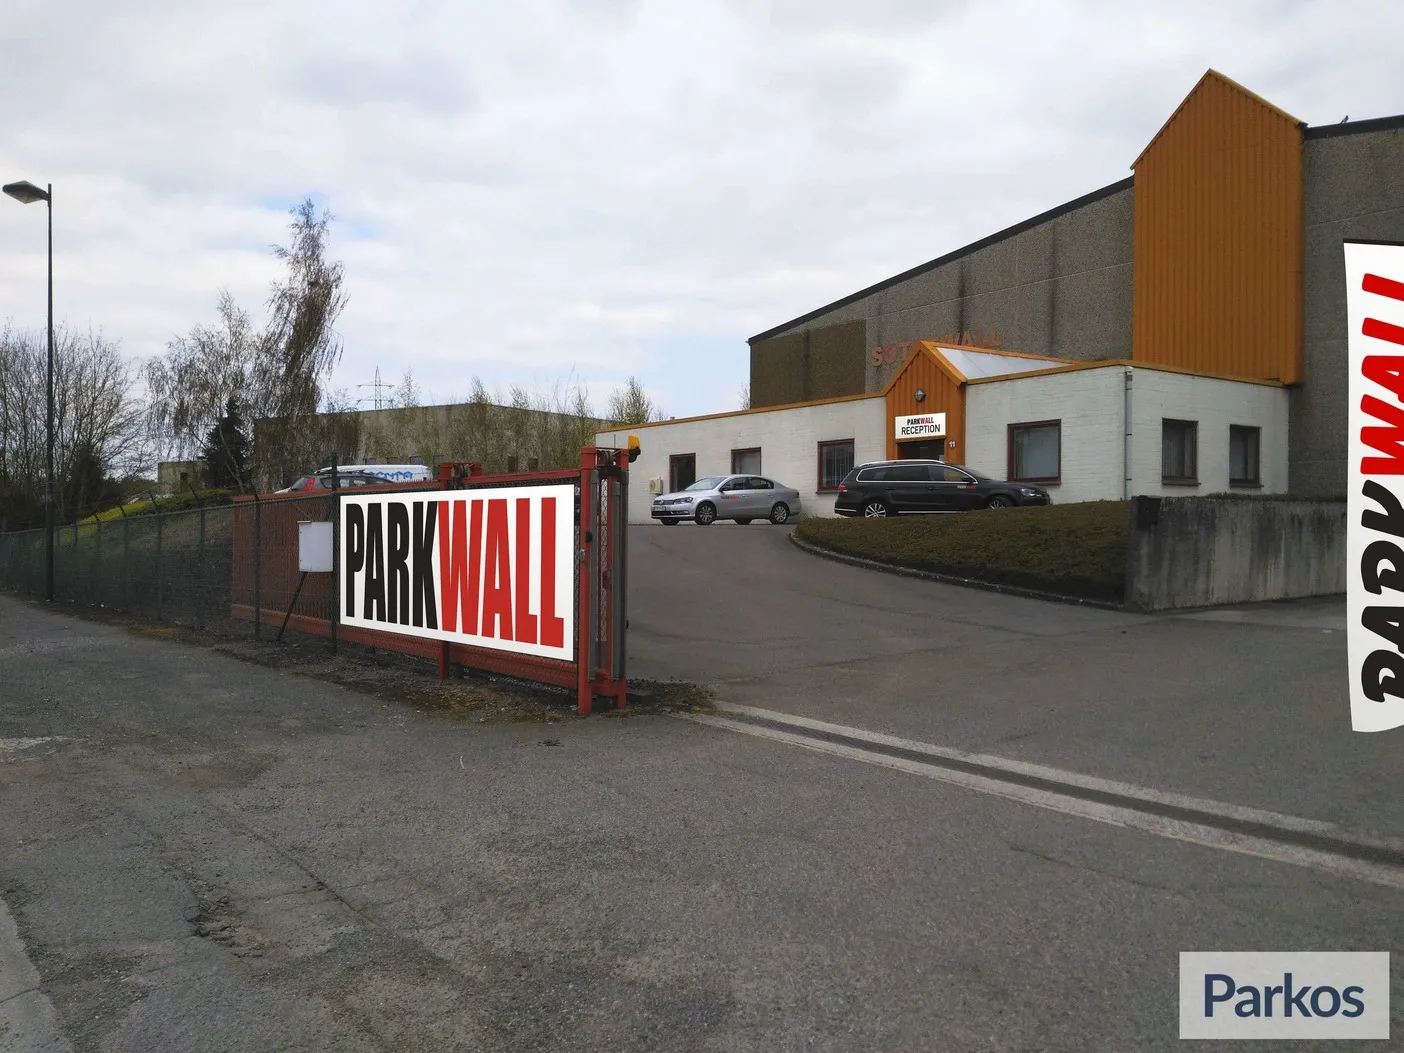 Parkwall - Parking Charleroi - picture 1